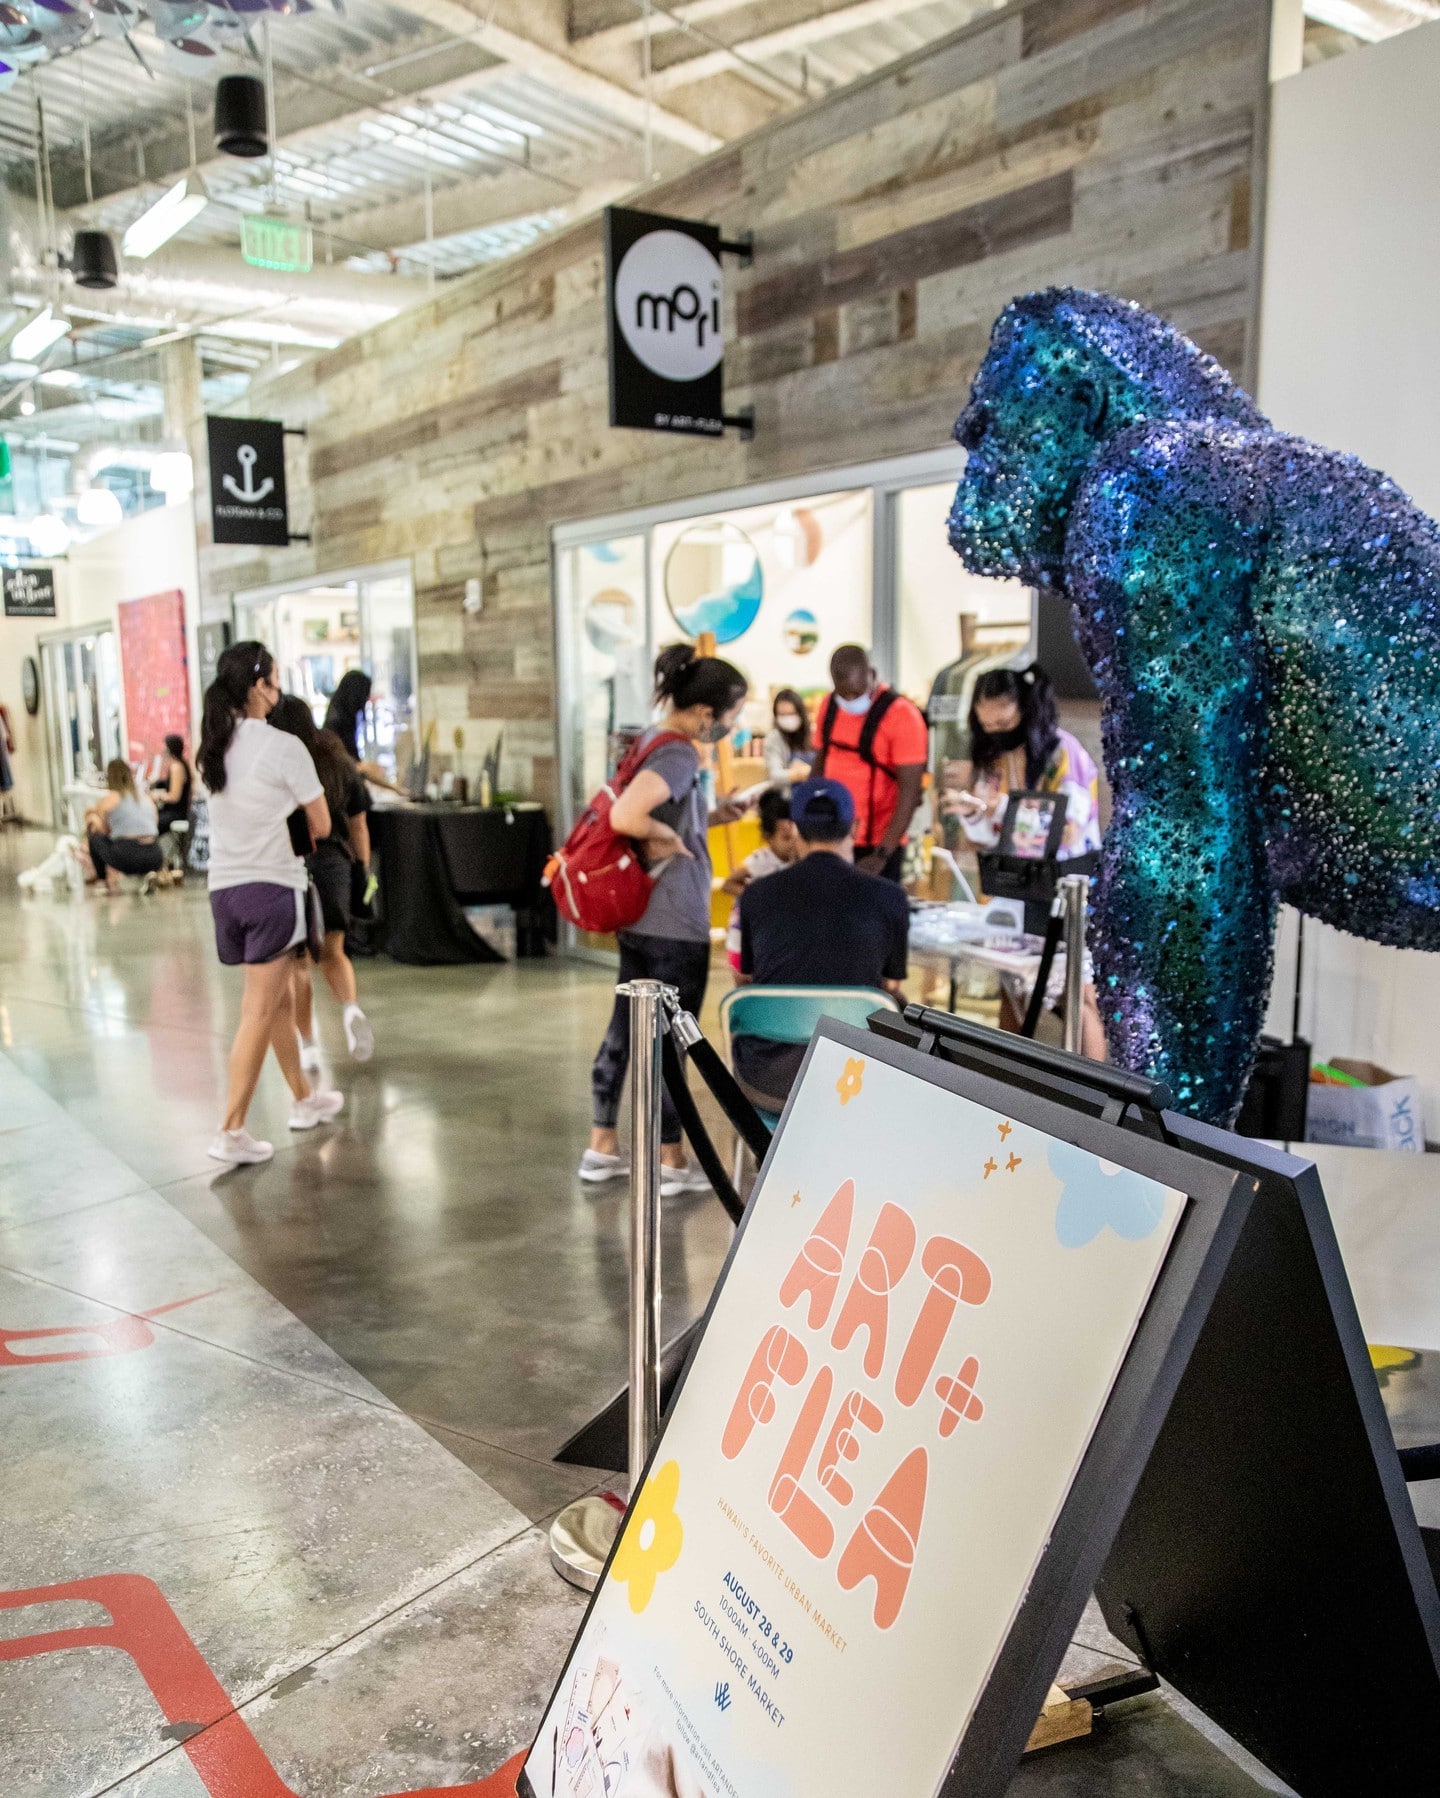 For food, fashion, art and more, join us at the Art + Flea Market returning to Ward Village. Visit South Shore Market on March 12 & 13 to enjoy a selection offered from over 40 local vendors.